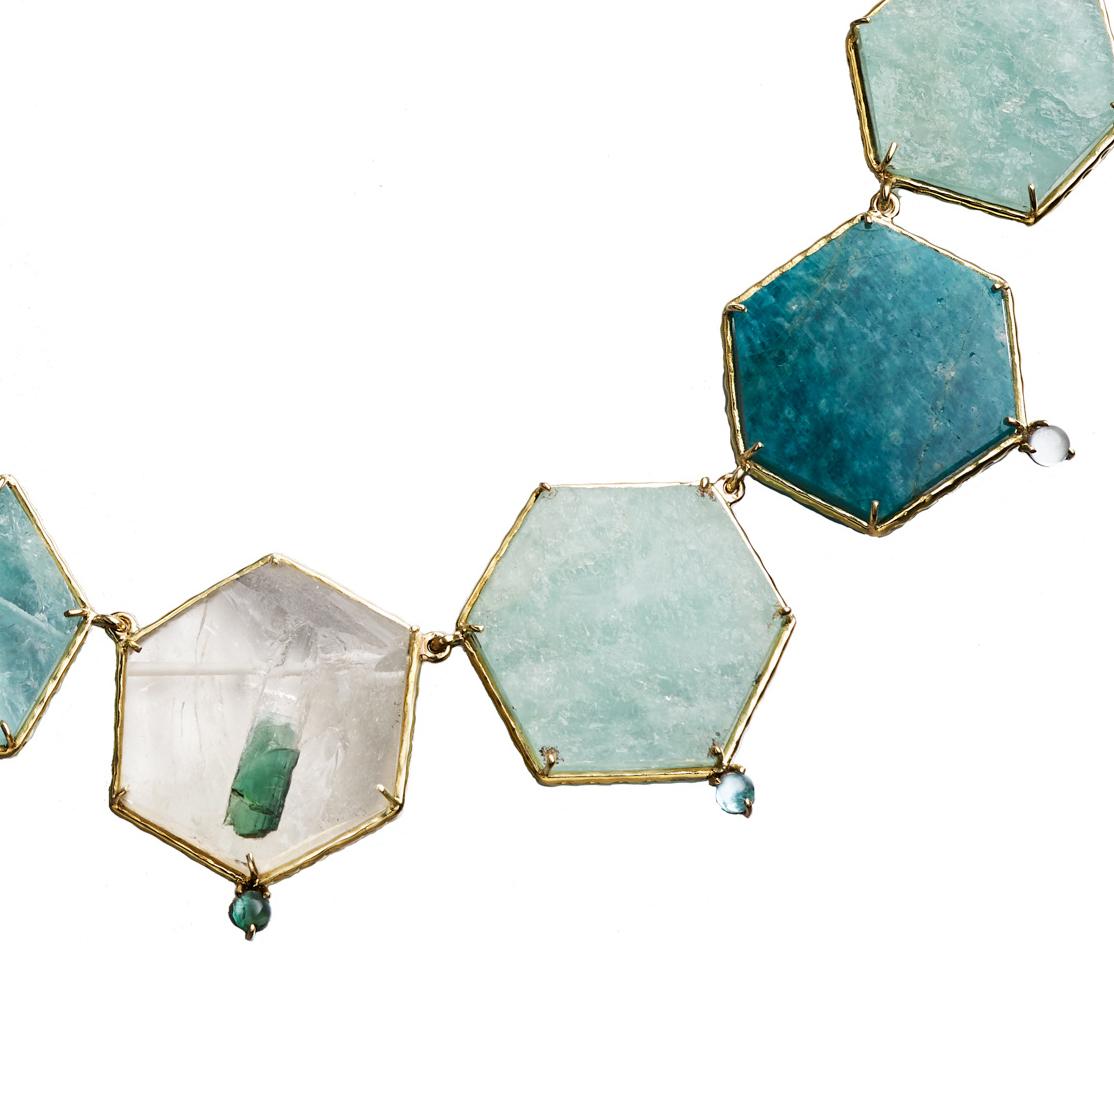 Gorgeous hexagonal shapes of natural rough and polished aquamarine and amazonite are set in marquise-engraved 18k yellow gold in this special Daria de Koning masterpiece. A centerpiece hexagonal stone features a fragment of a blue-green tourmaline